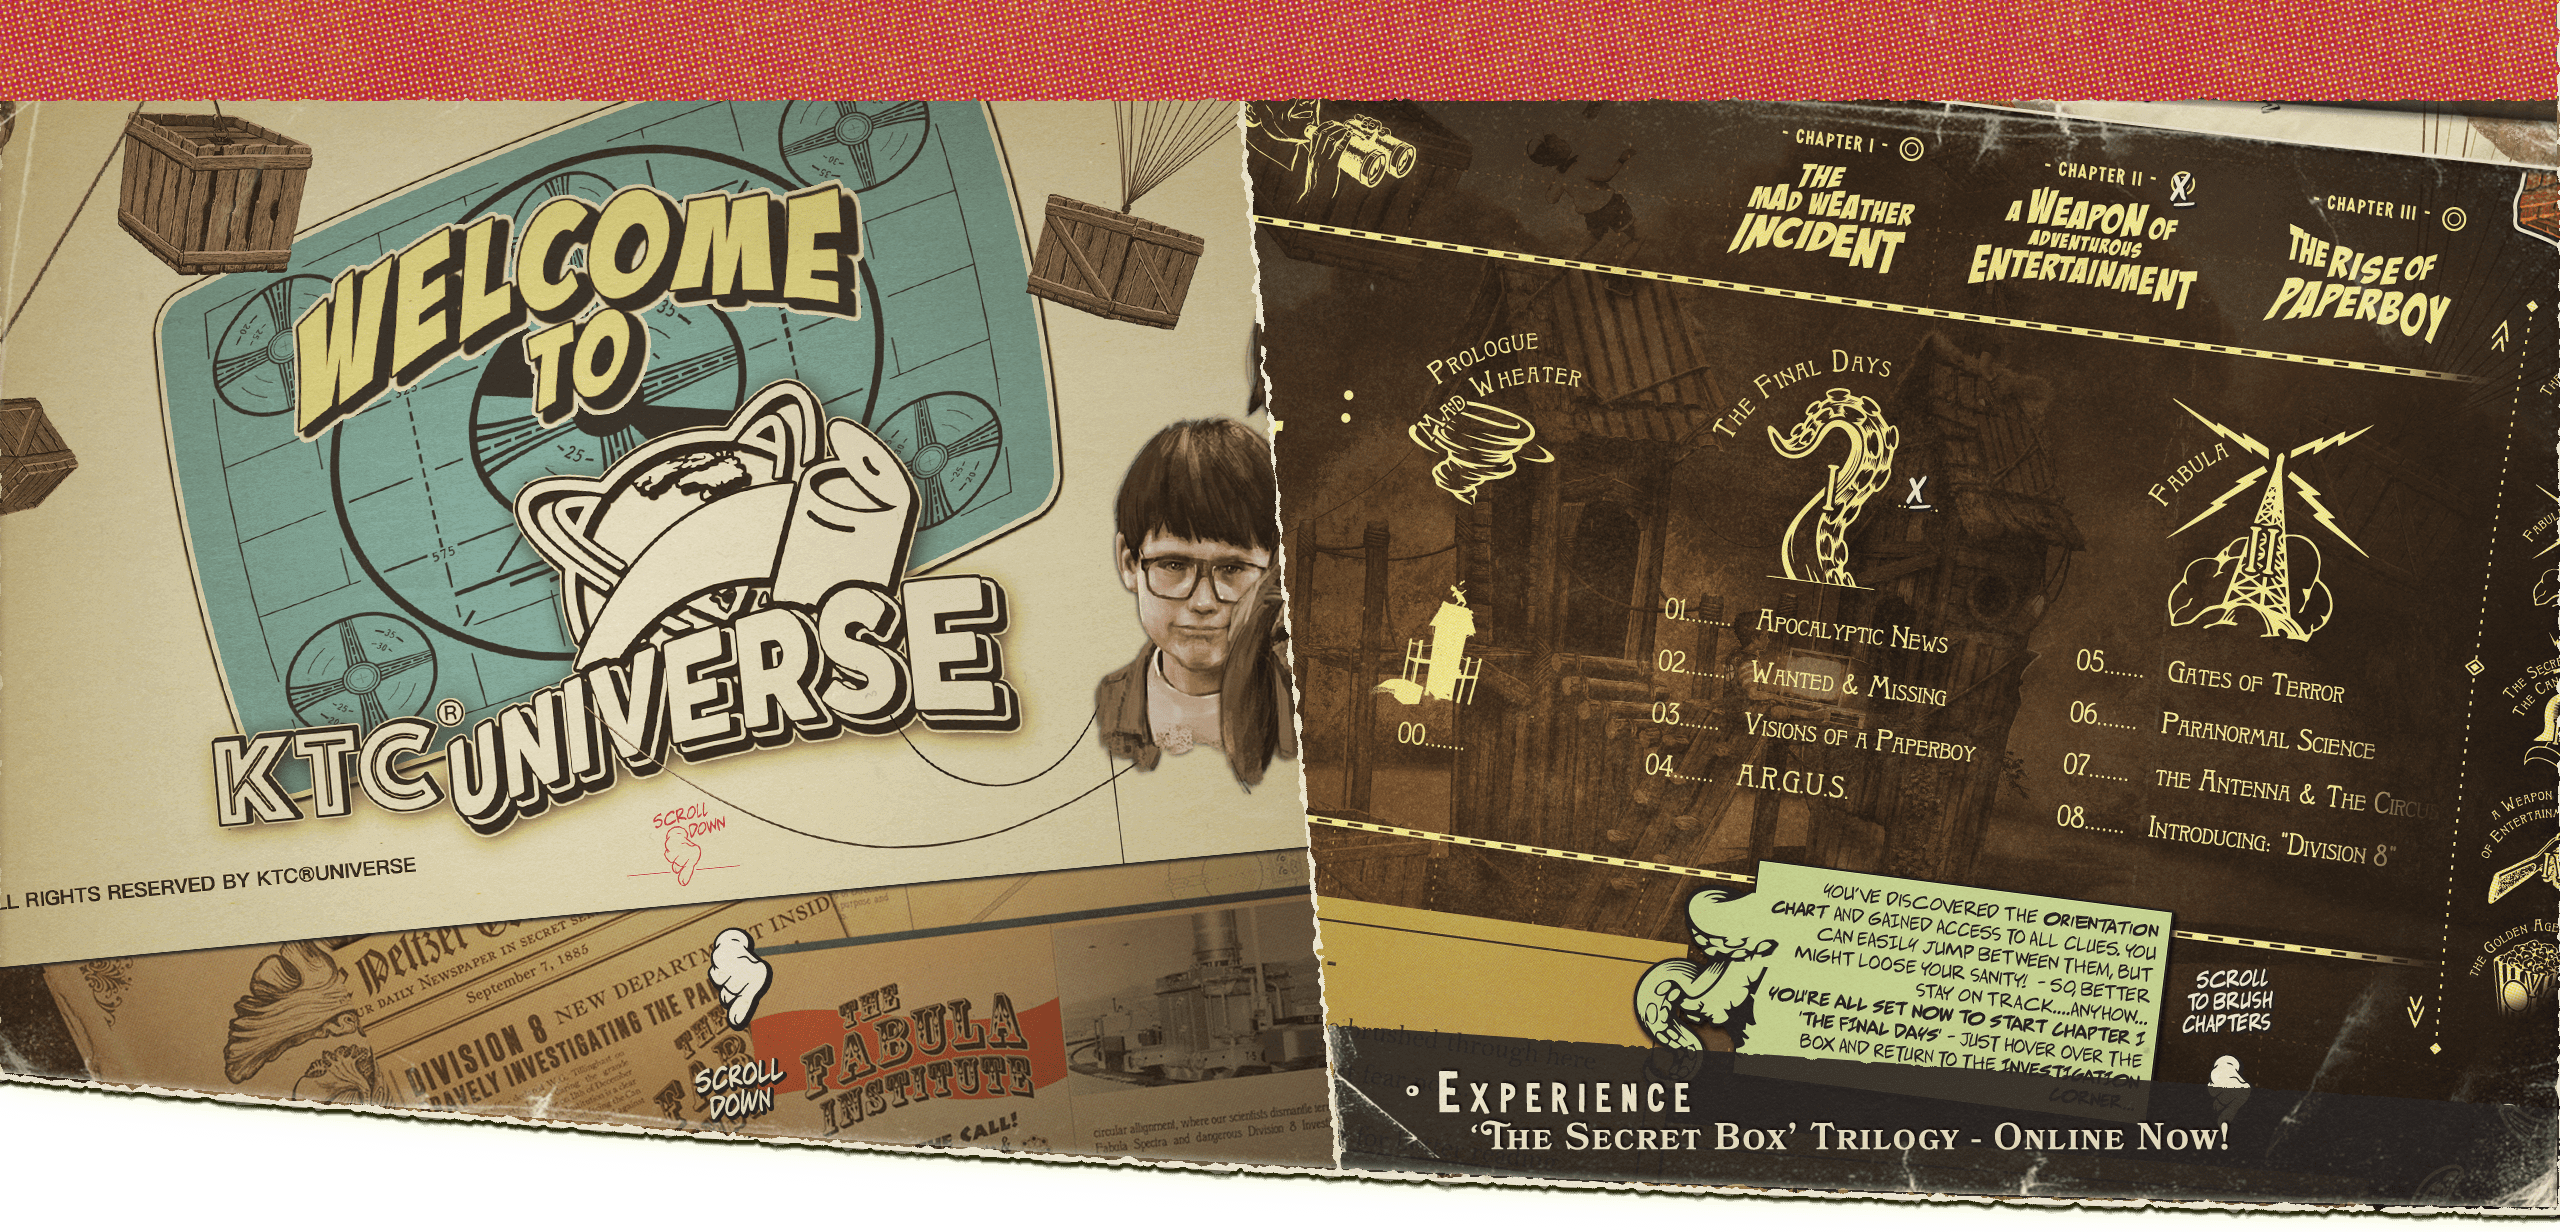 Welcome to KTC Universe - Experience The Secret Box' Trilogy - online now